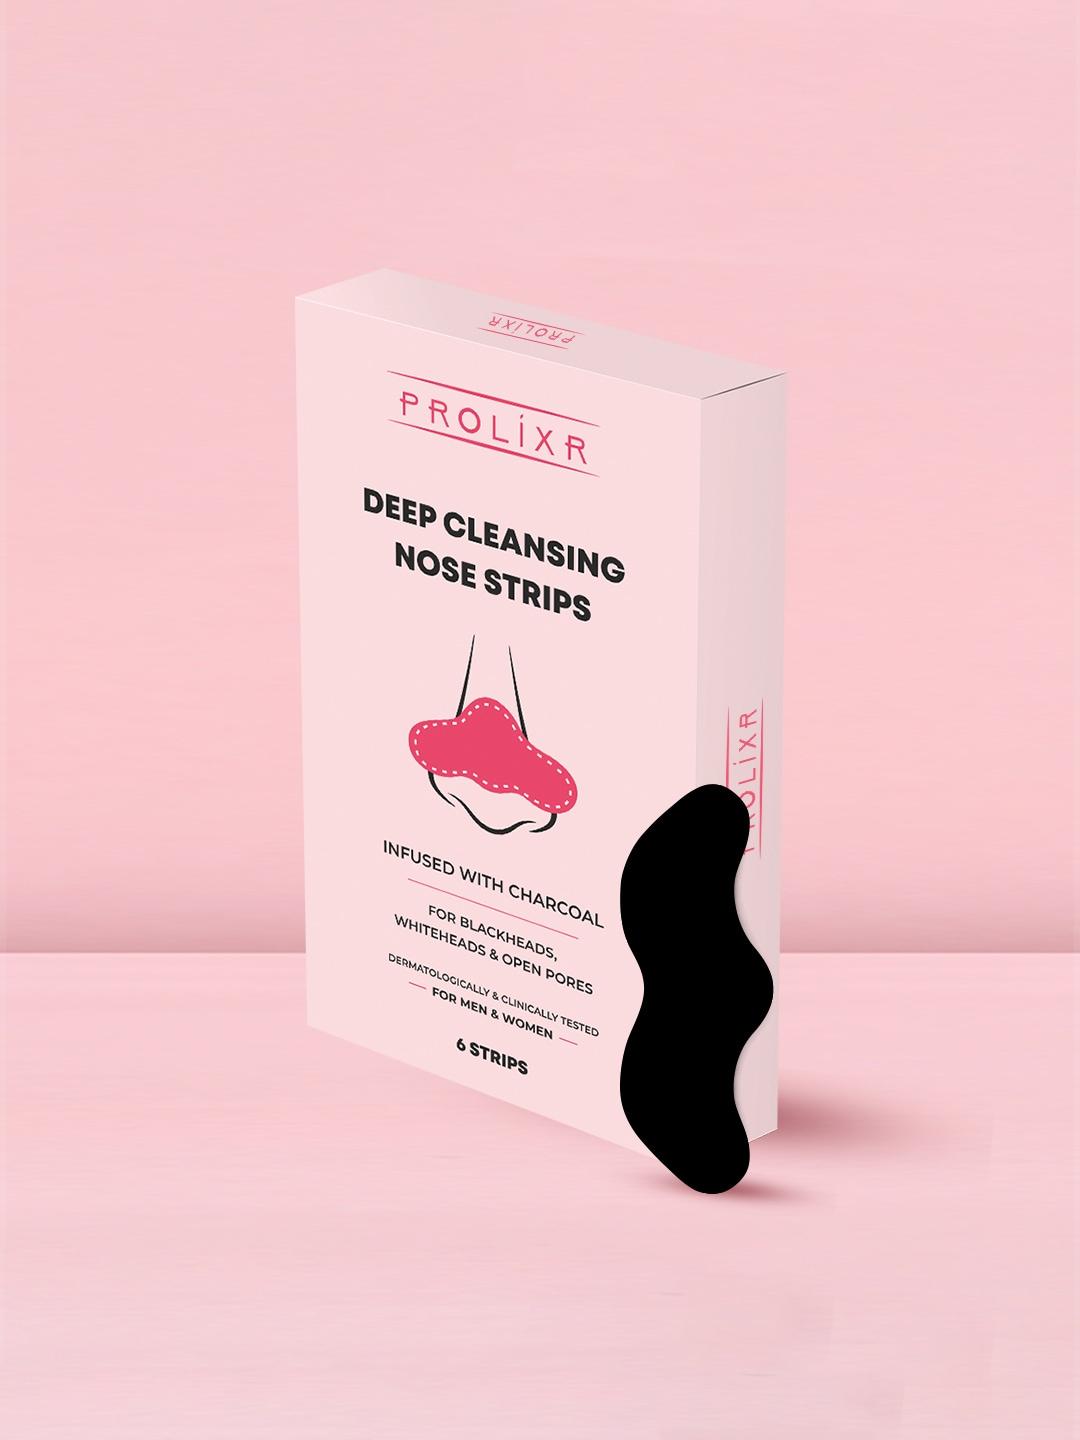 PROLIXR Deep Cleansing Nose Strips - Removes blackheads & Purifies Skin - 6 strips